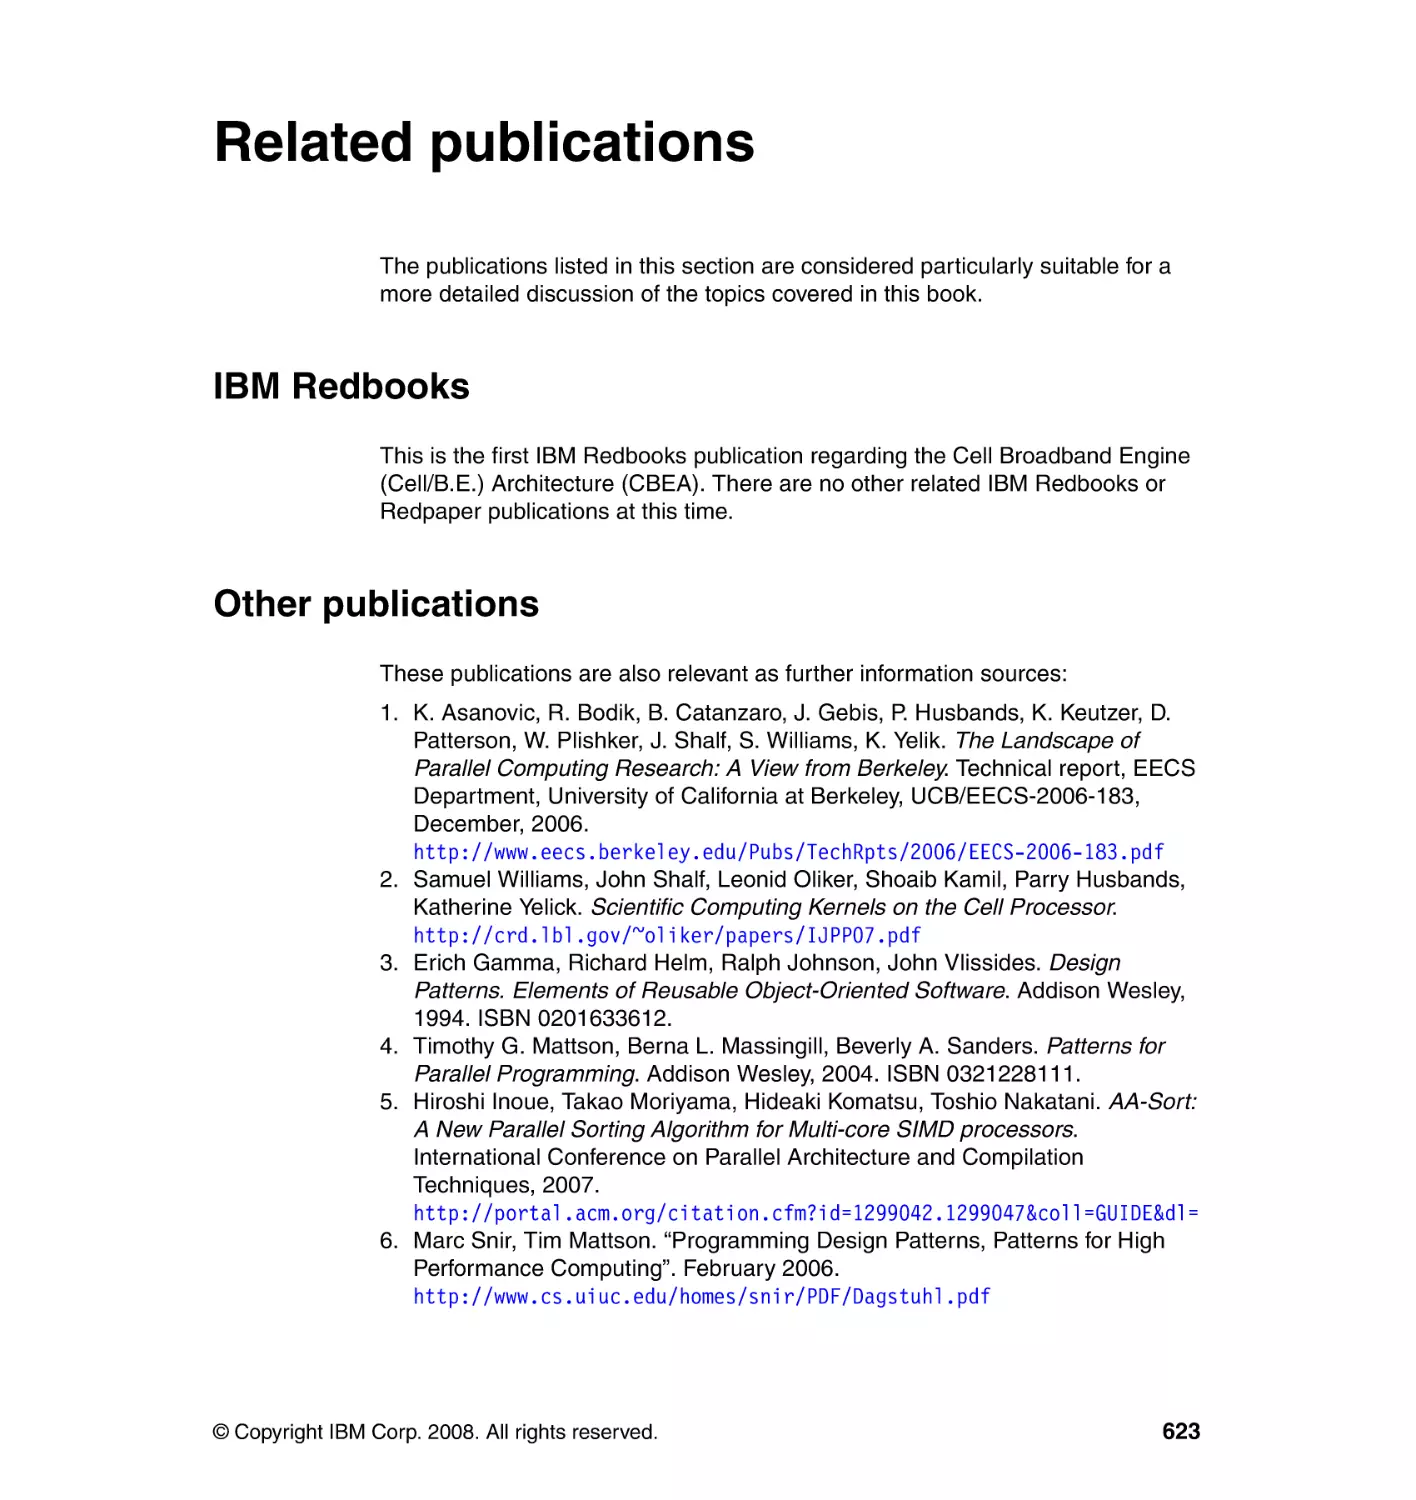 Related publications
IBM Redbooks
Other publications